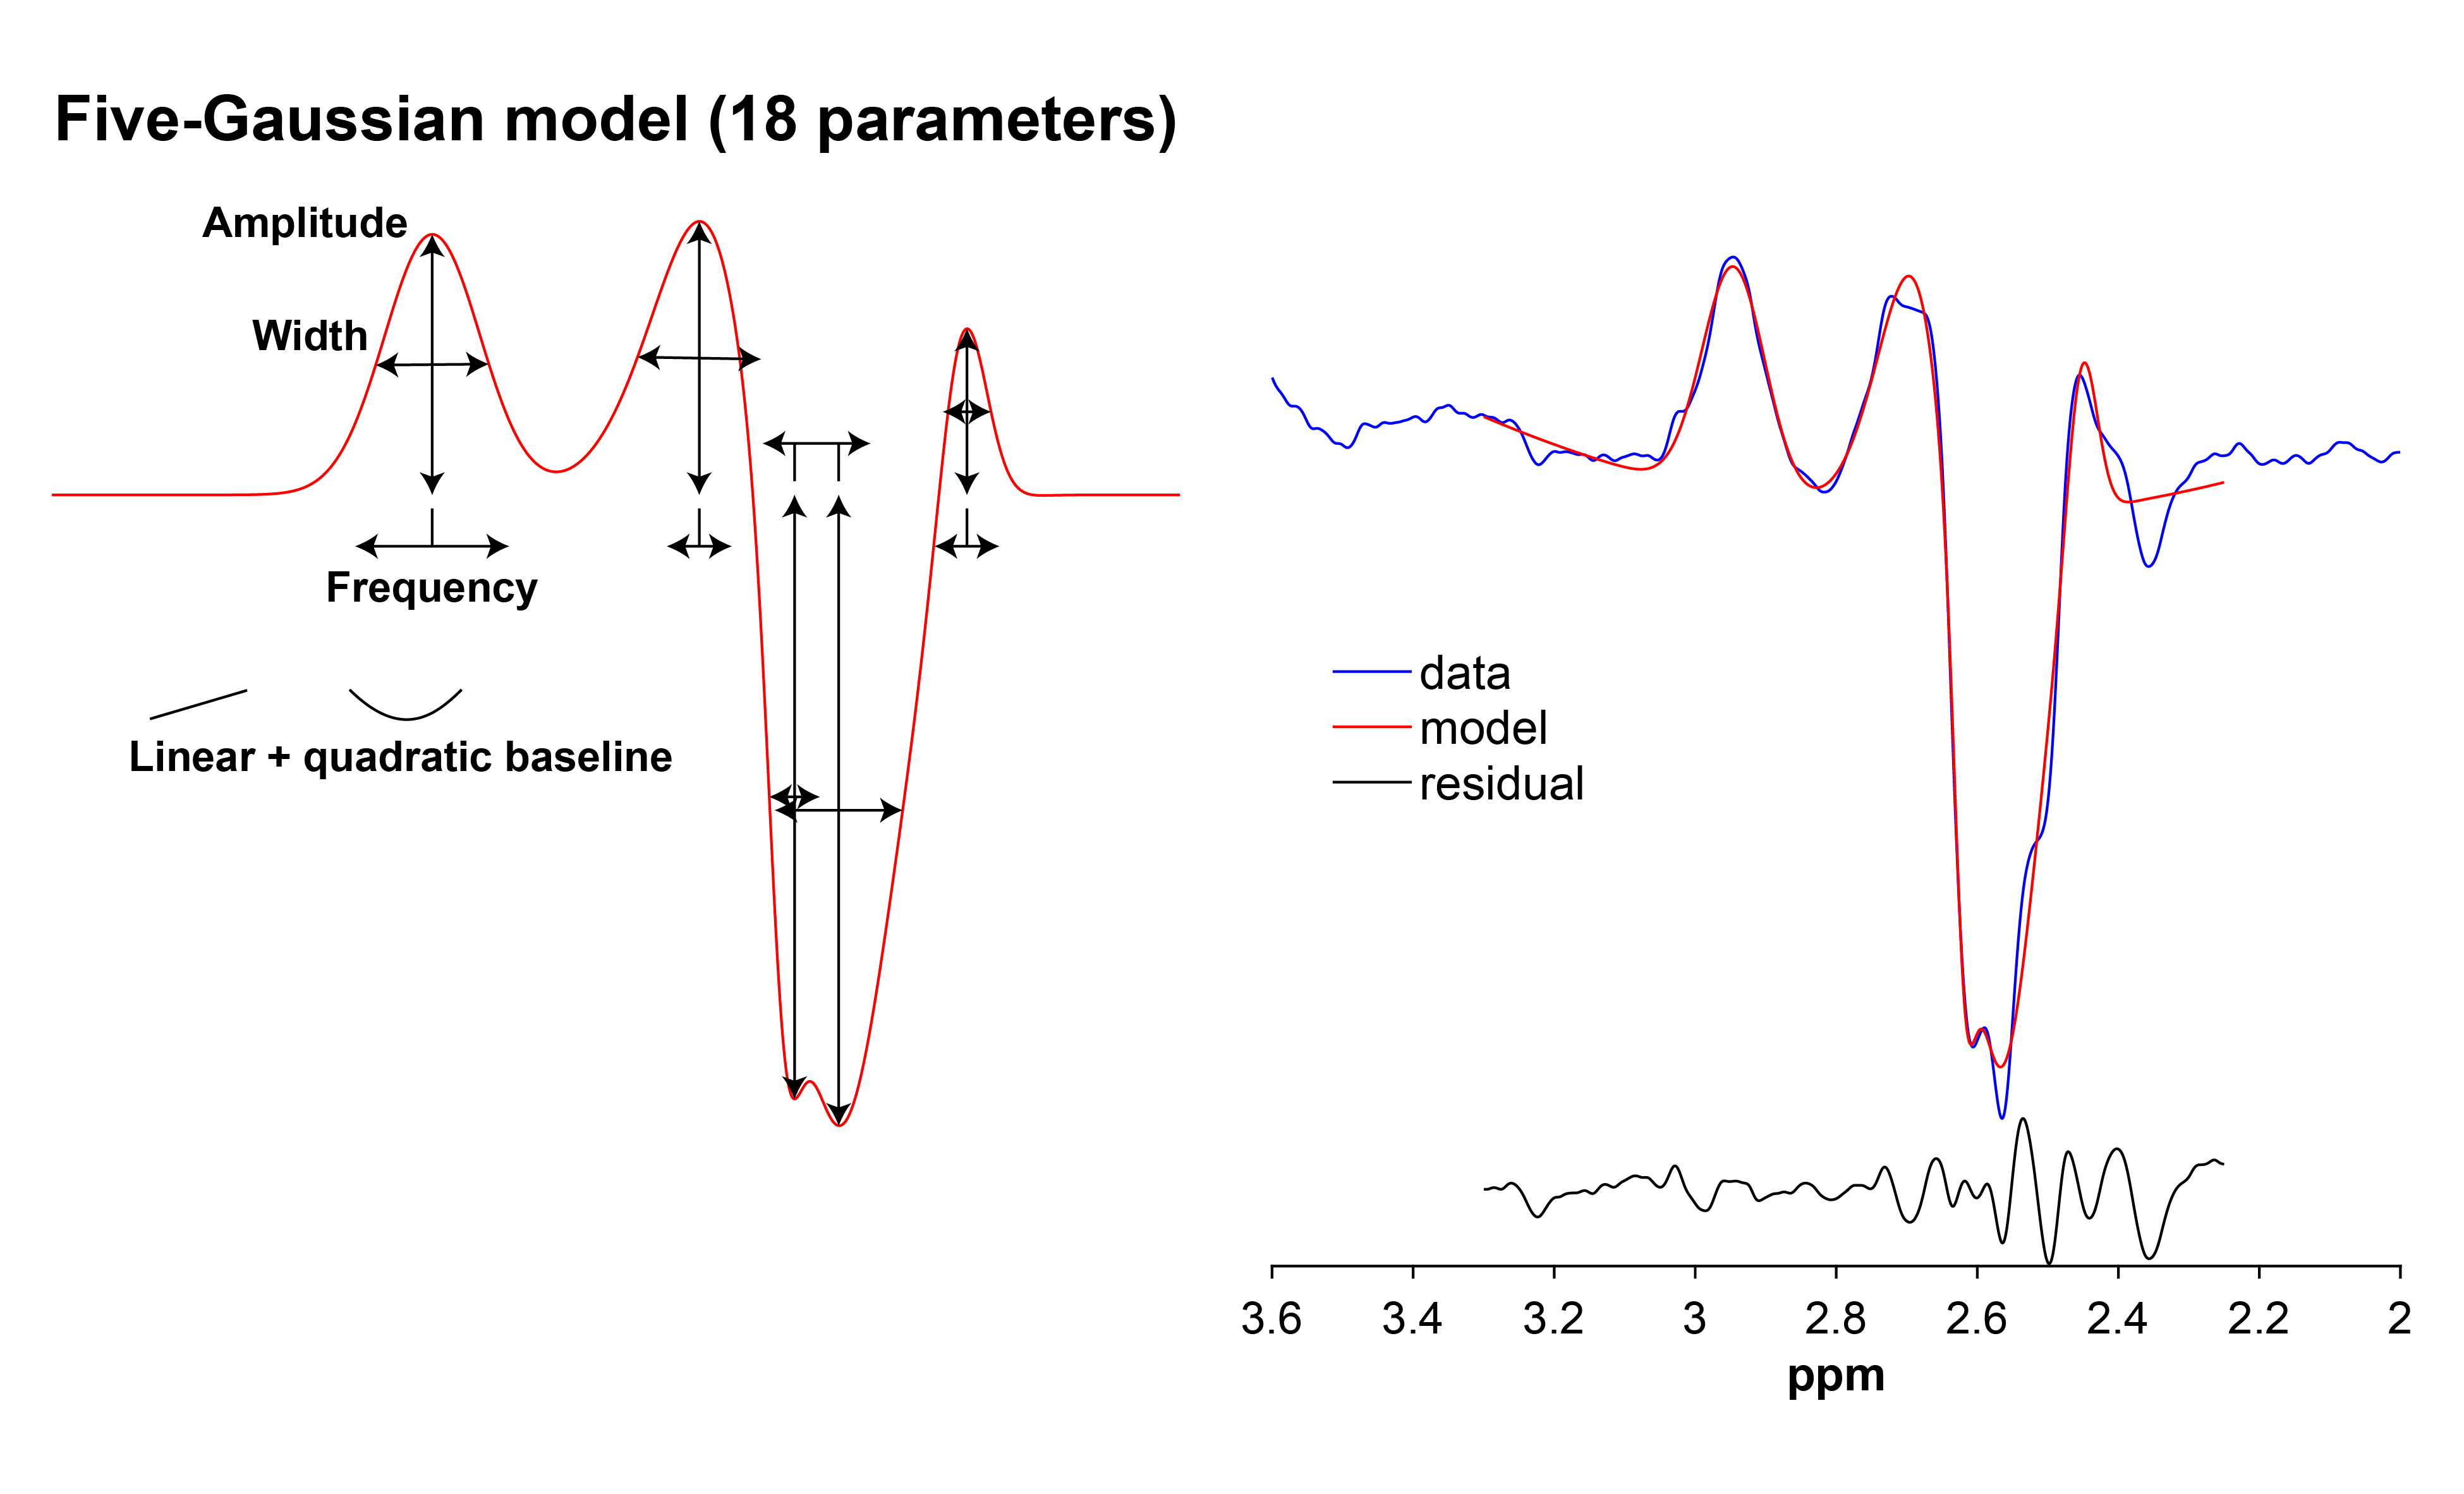 Illustration of the GSH model at TE = 80 ms